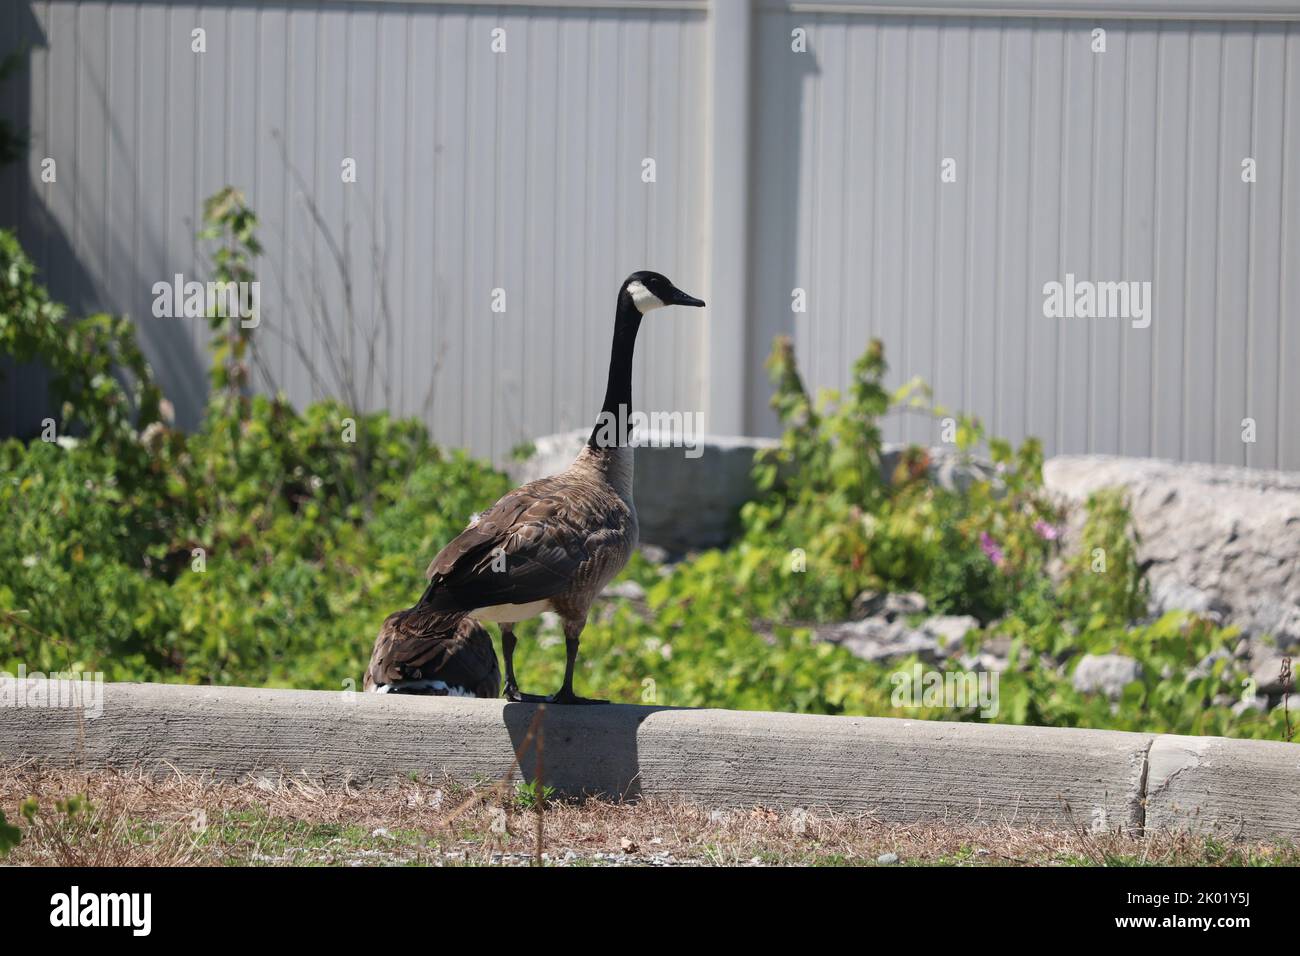 A Canada goose (Branta canadensis) on a curb Stock Photo